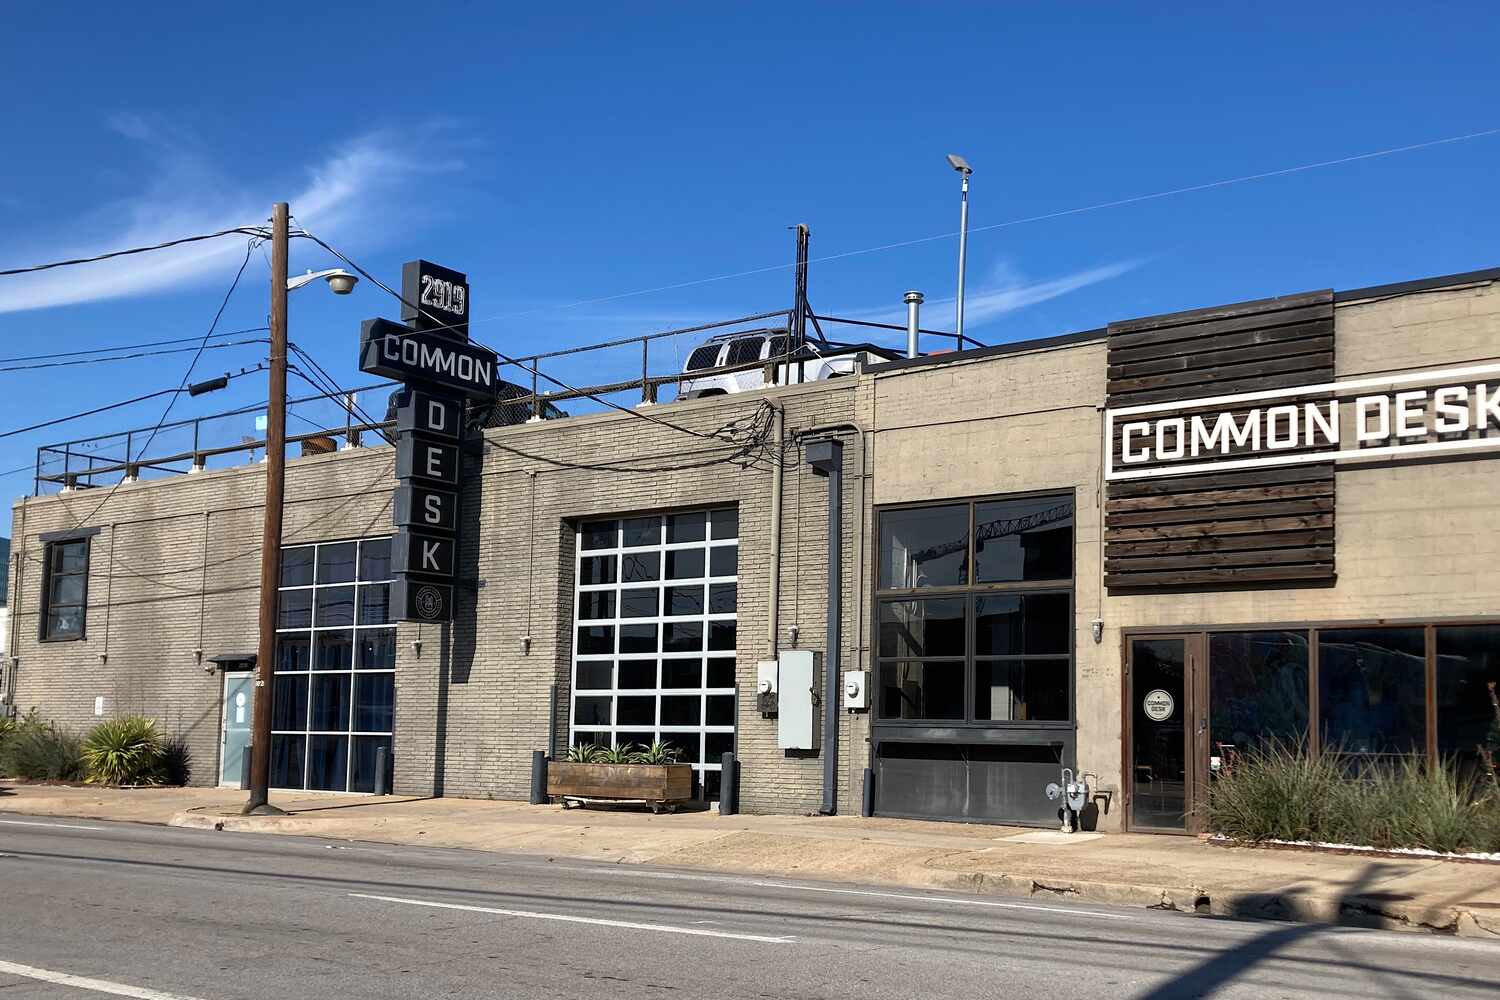 Common Desk has operated the Deep Ellum location for more than a decade.